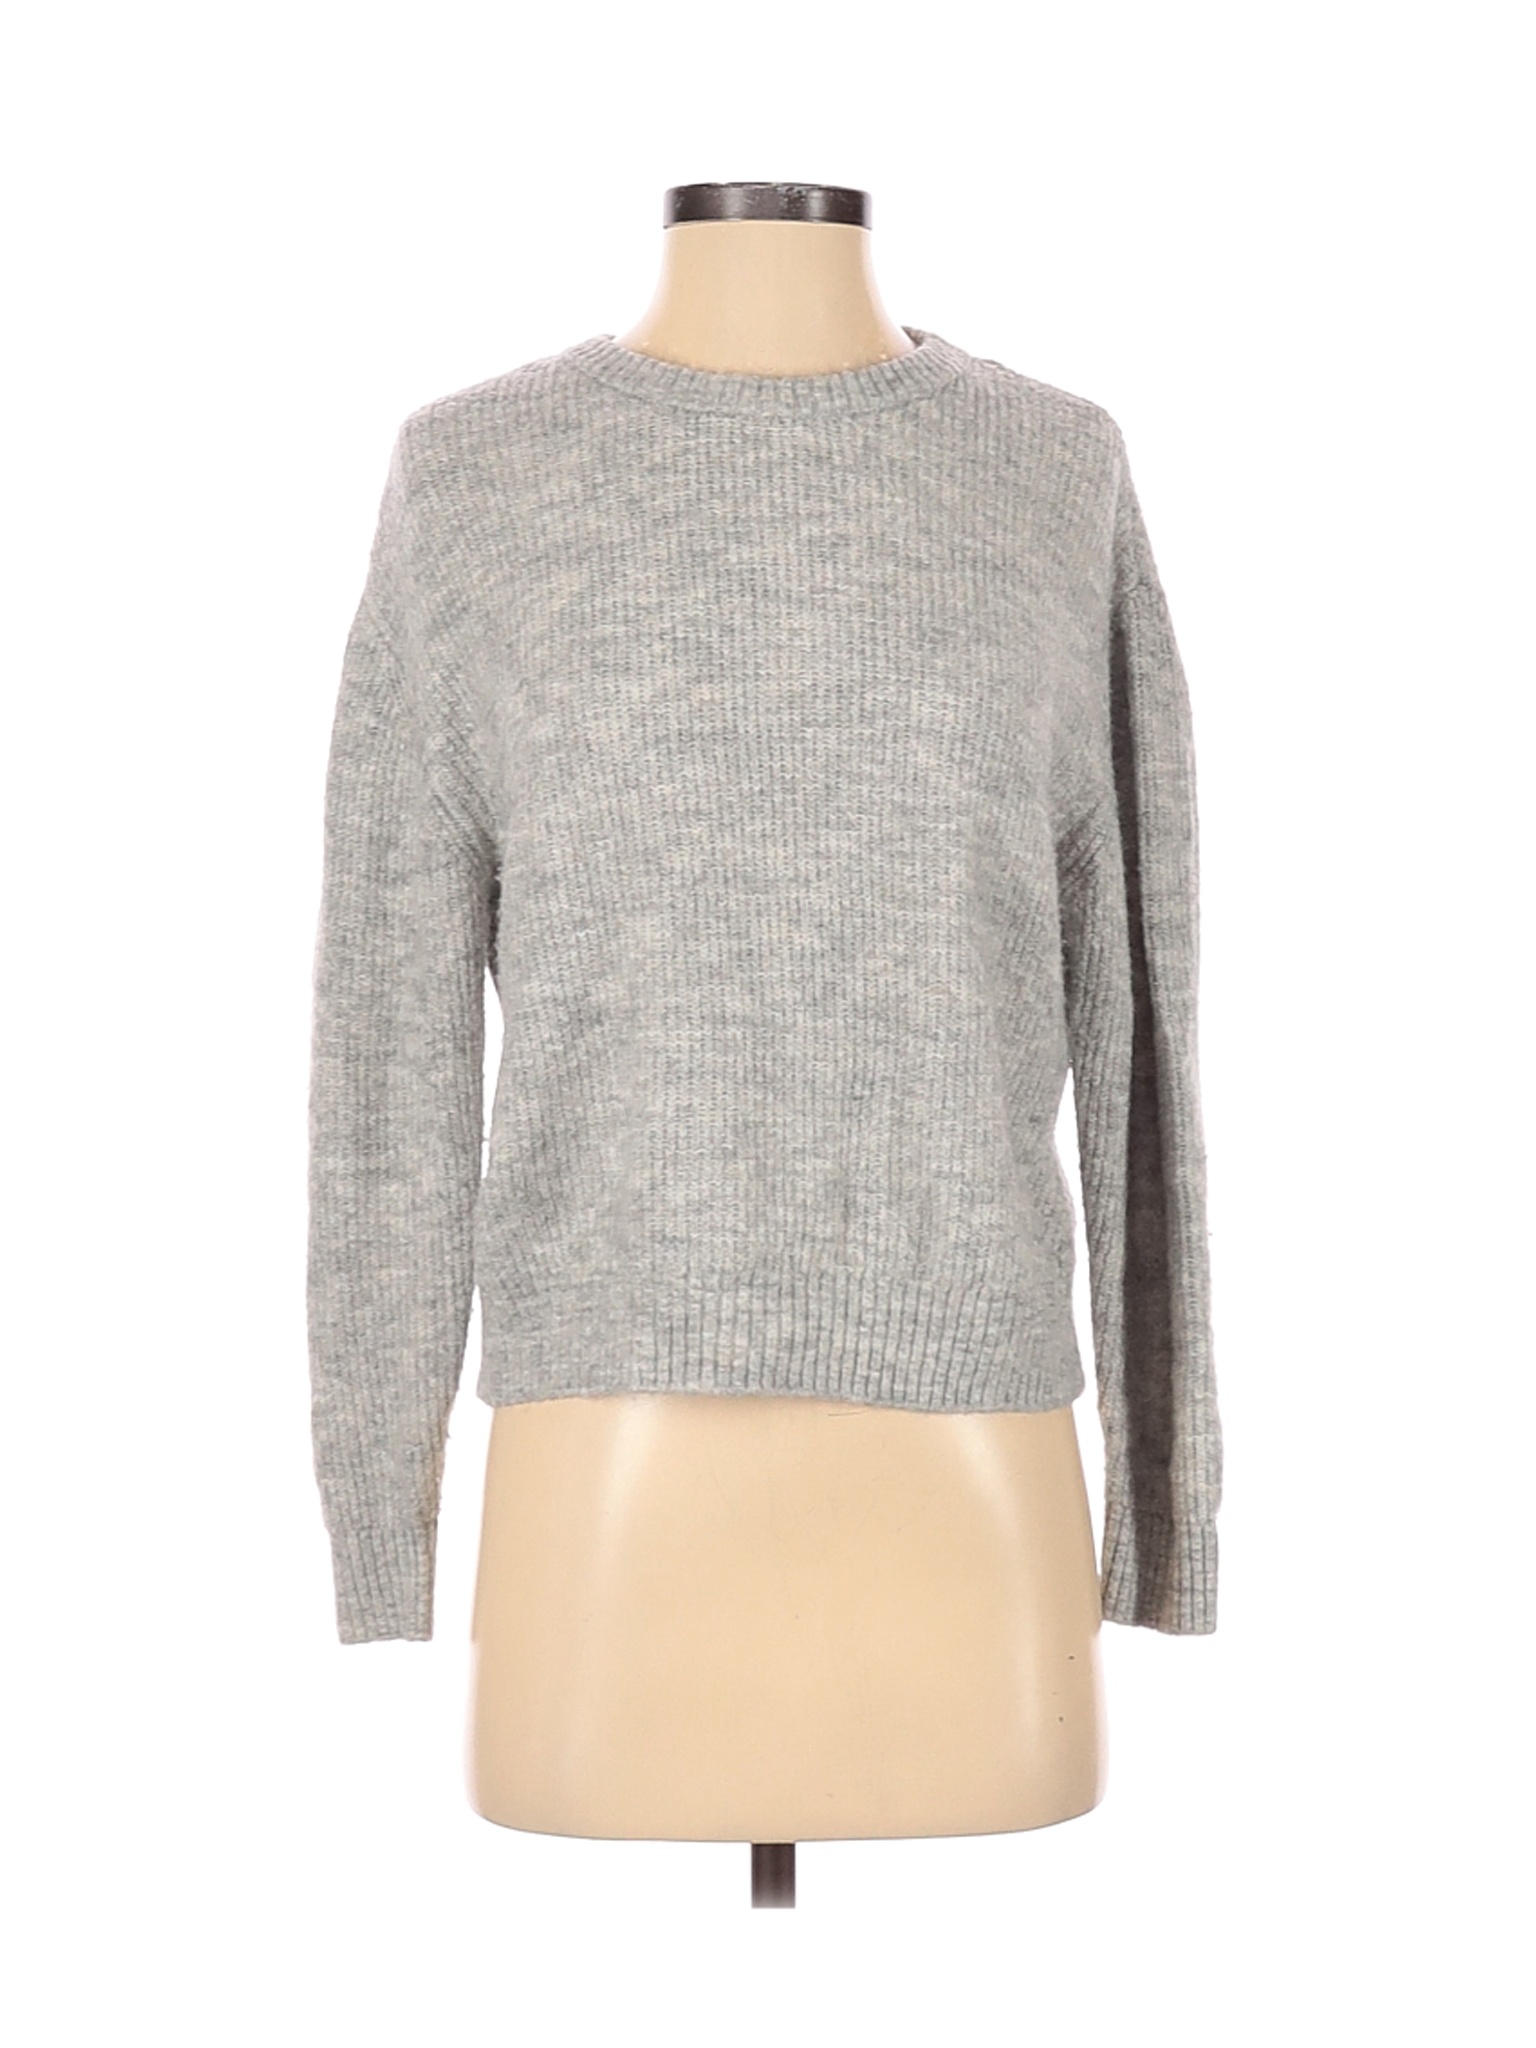 Divided by H&M Women Gray Pullover Sweater S | eBay